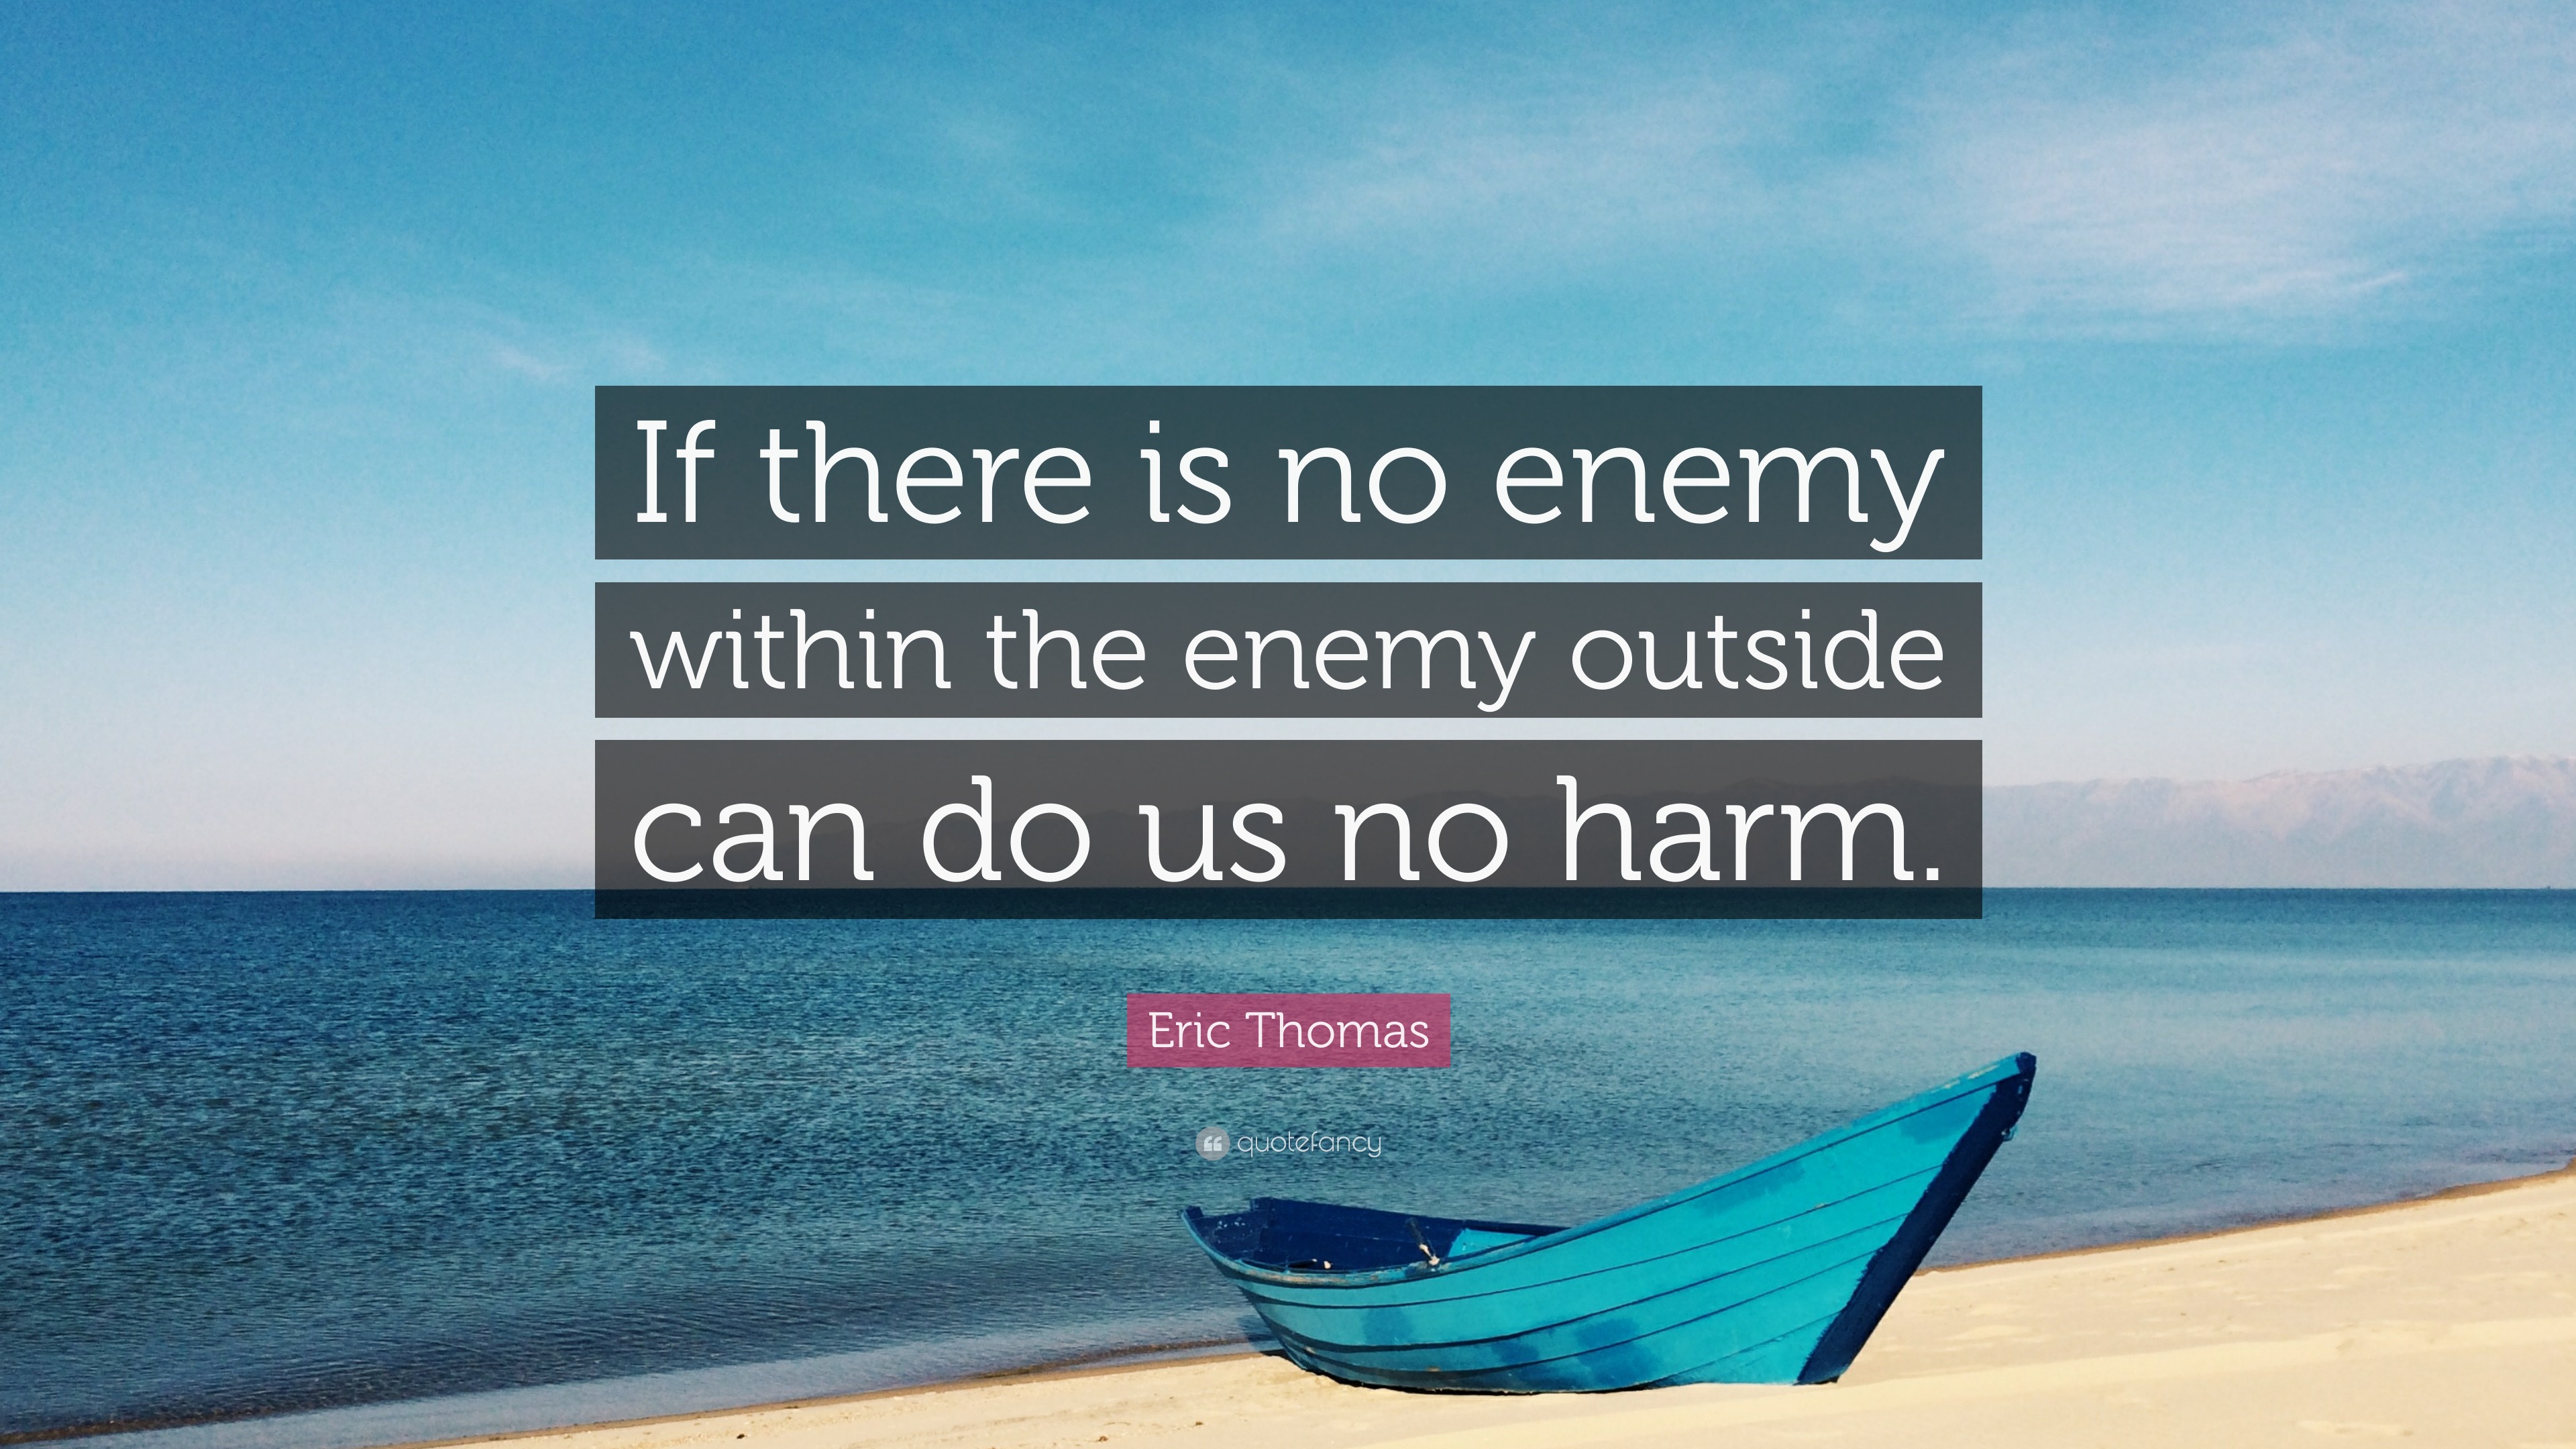 Eric Thomas Quote: “If there is no enemy within the enemy outside can